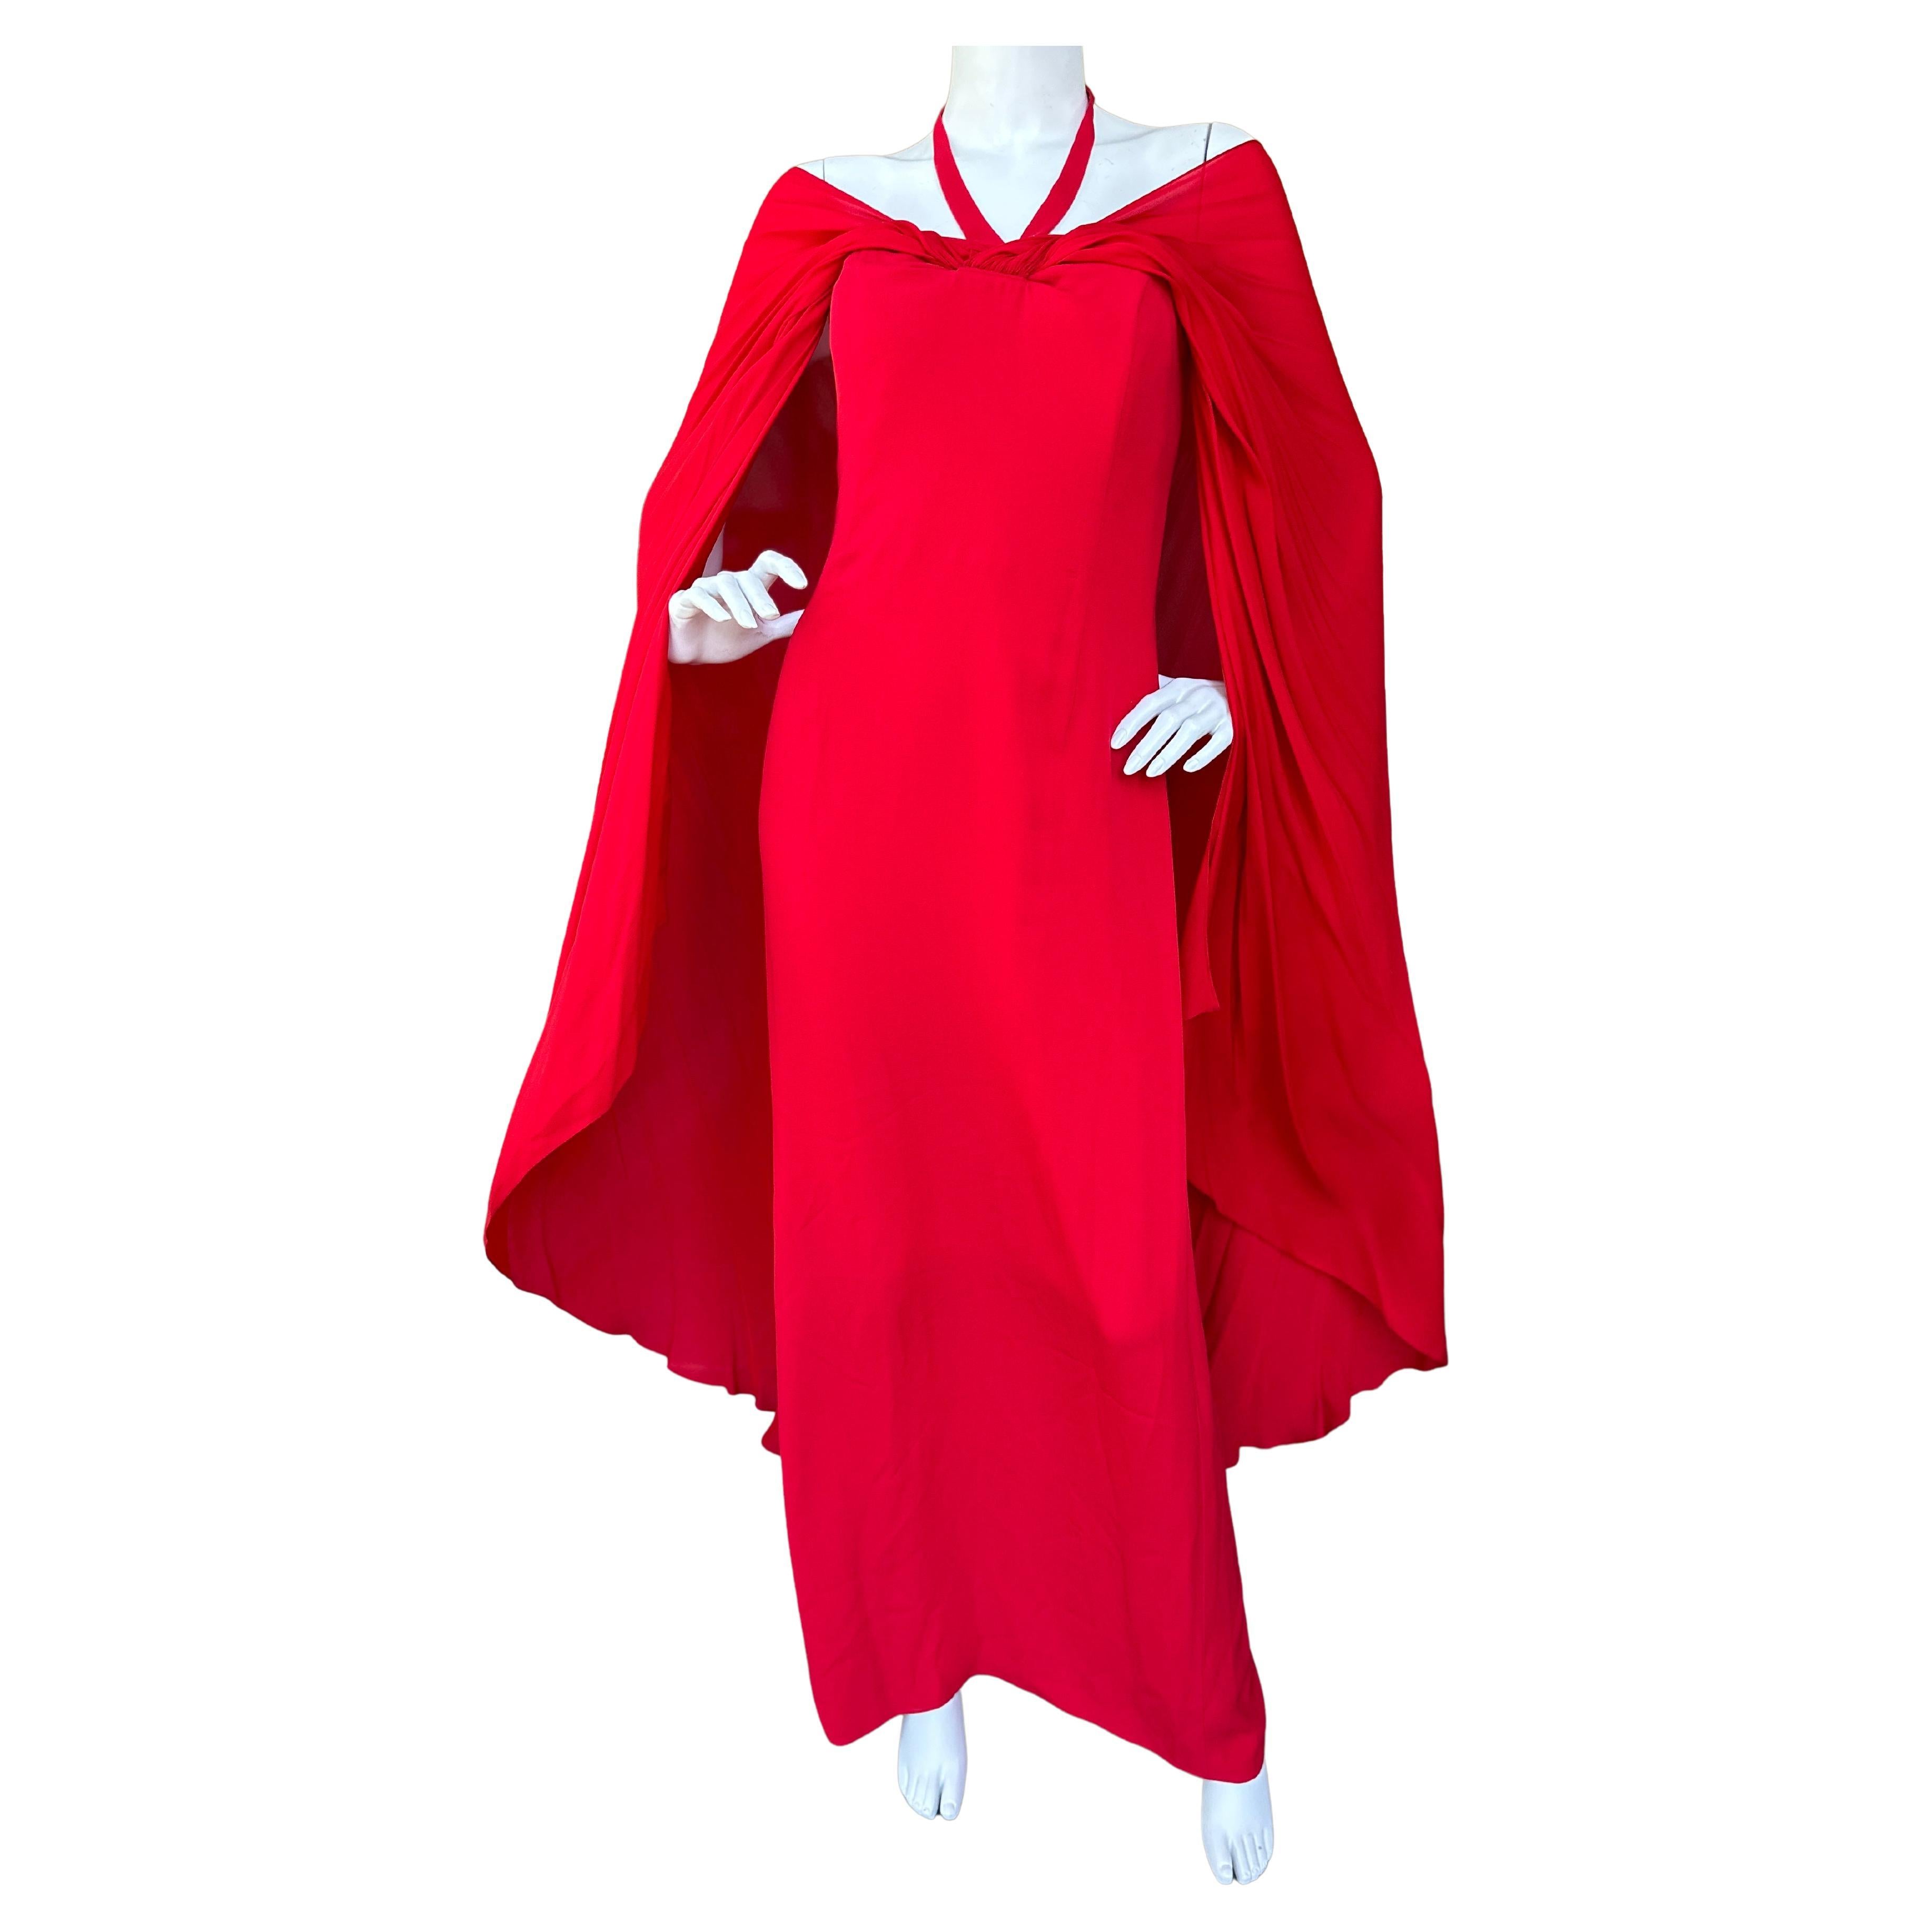 Bill Blass Vintage 1980's Red Silk Evening Dress with Attached Cape For Sale